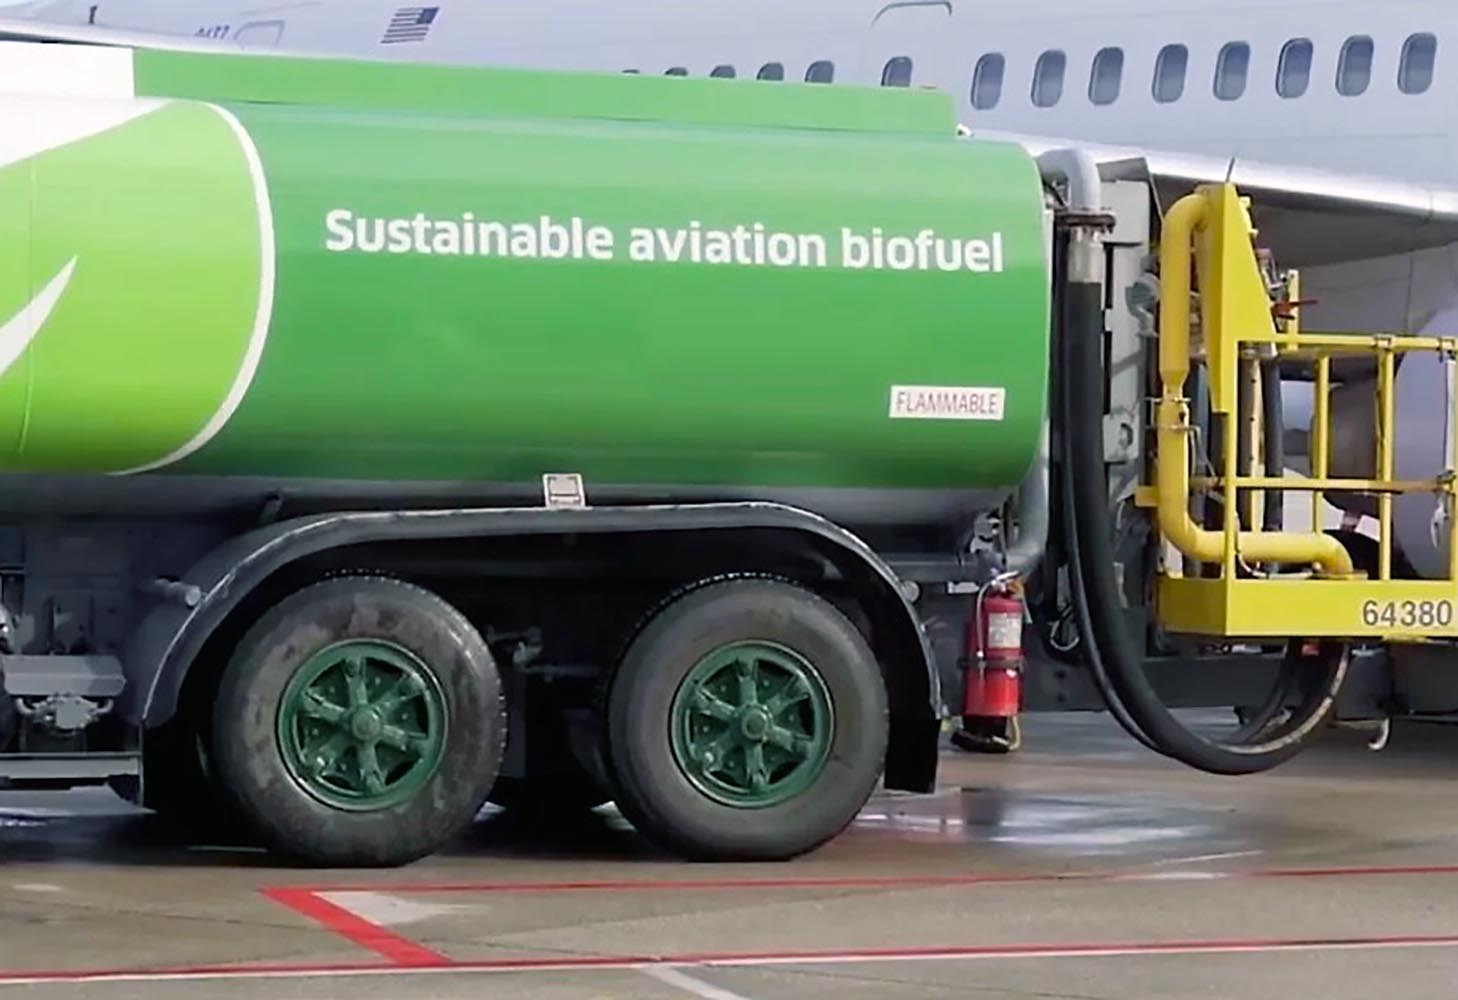 Honeywell introduces new ethanol-to-jet fuel technology